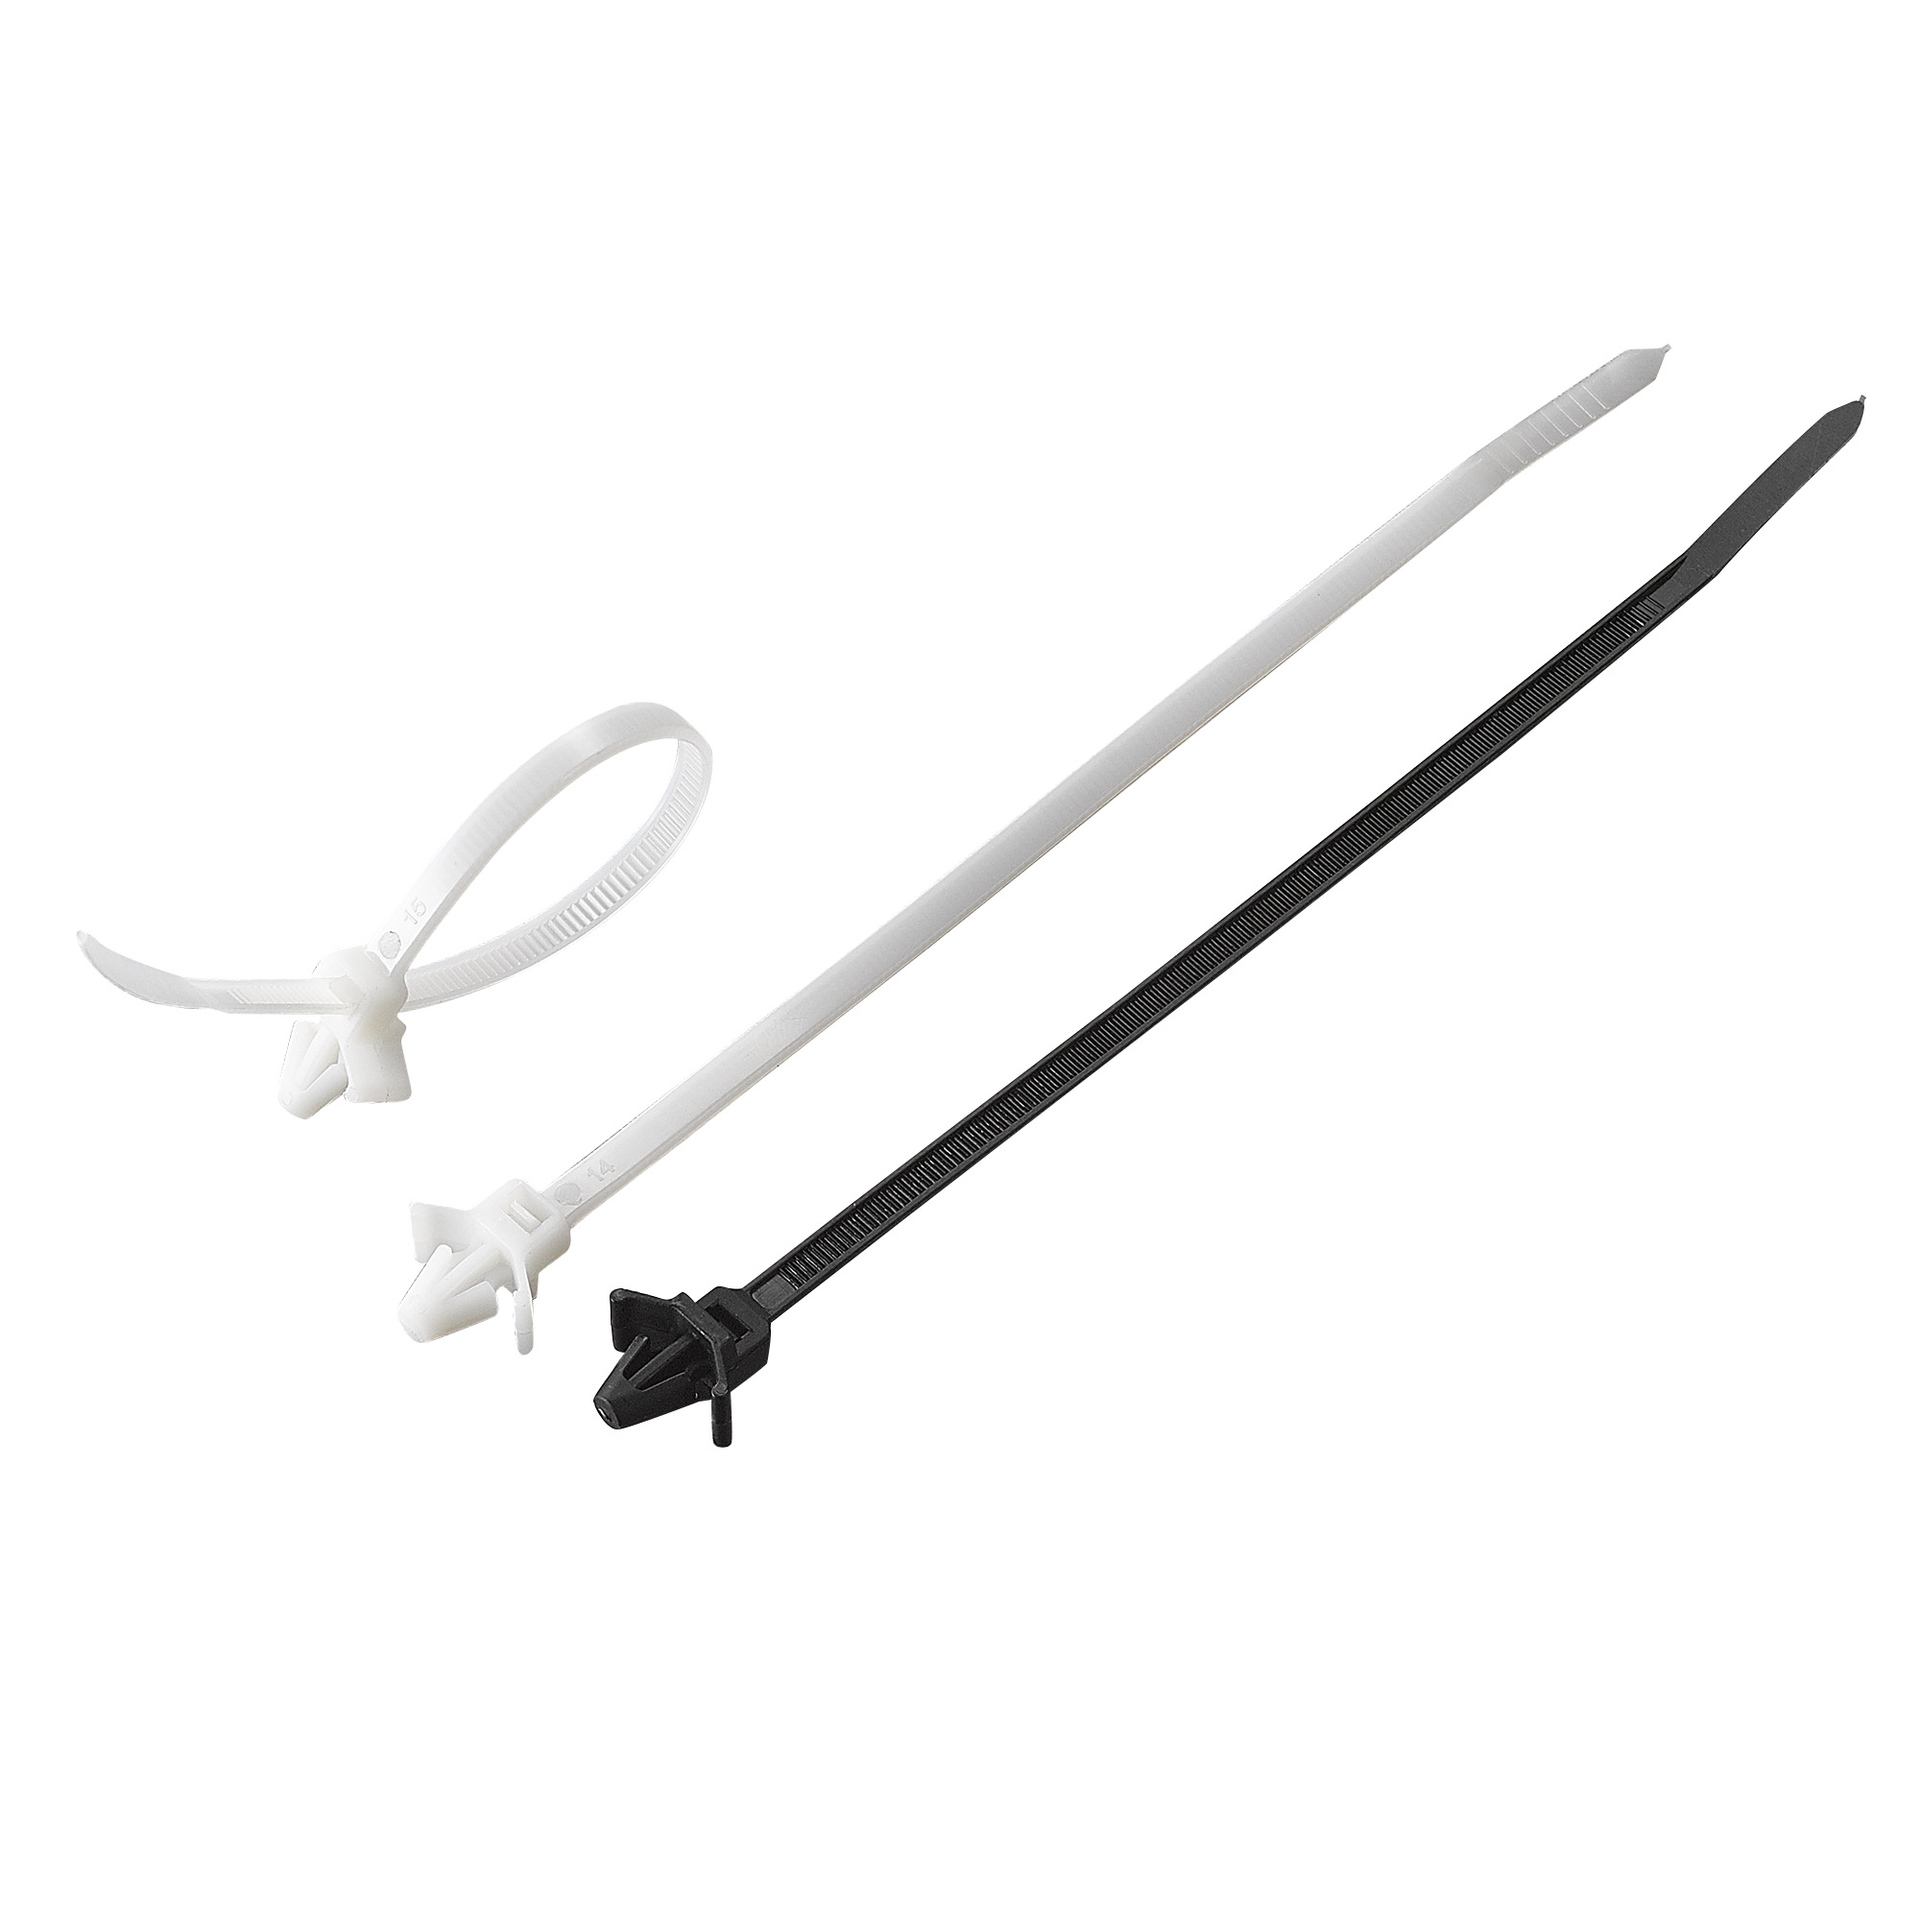 Professional Push mount cable ties